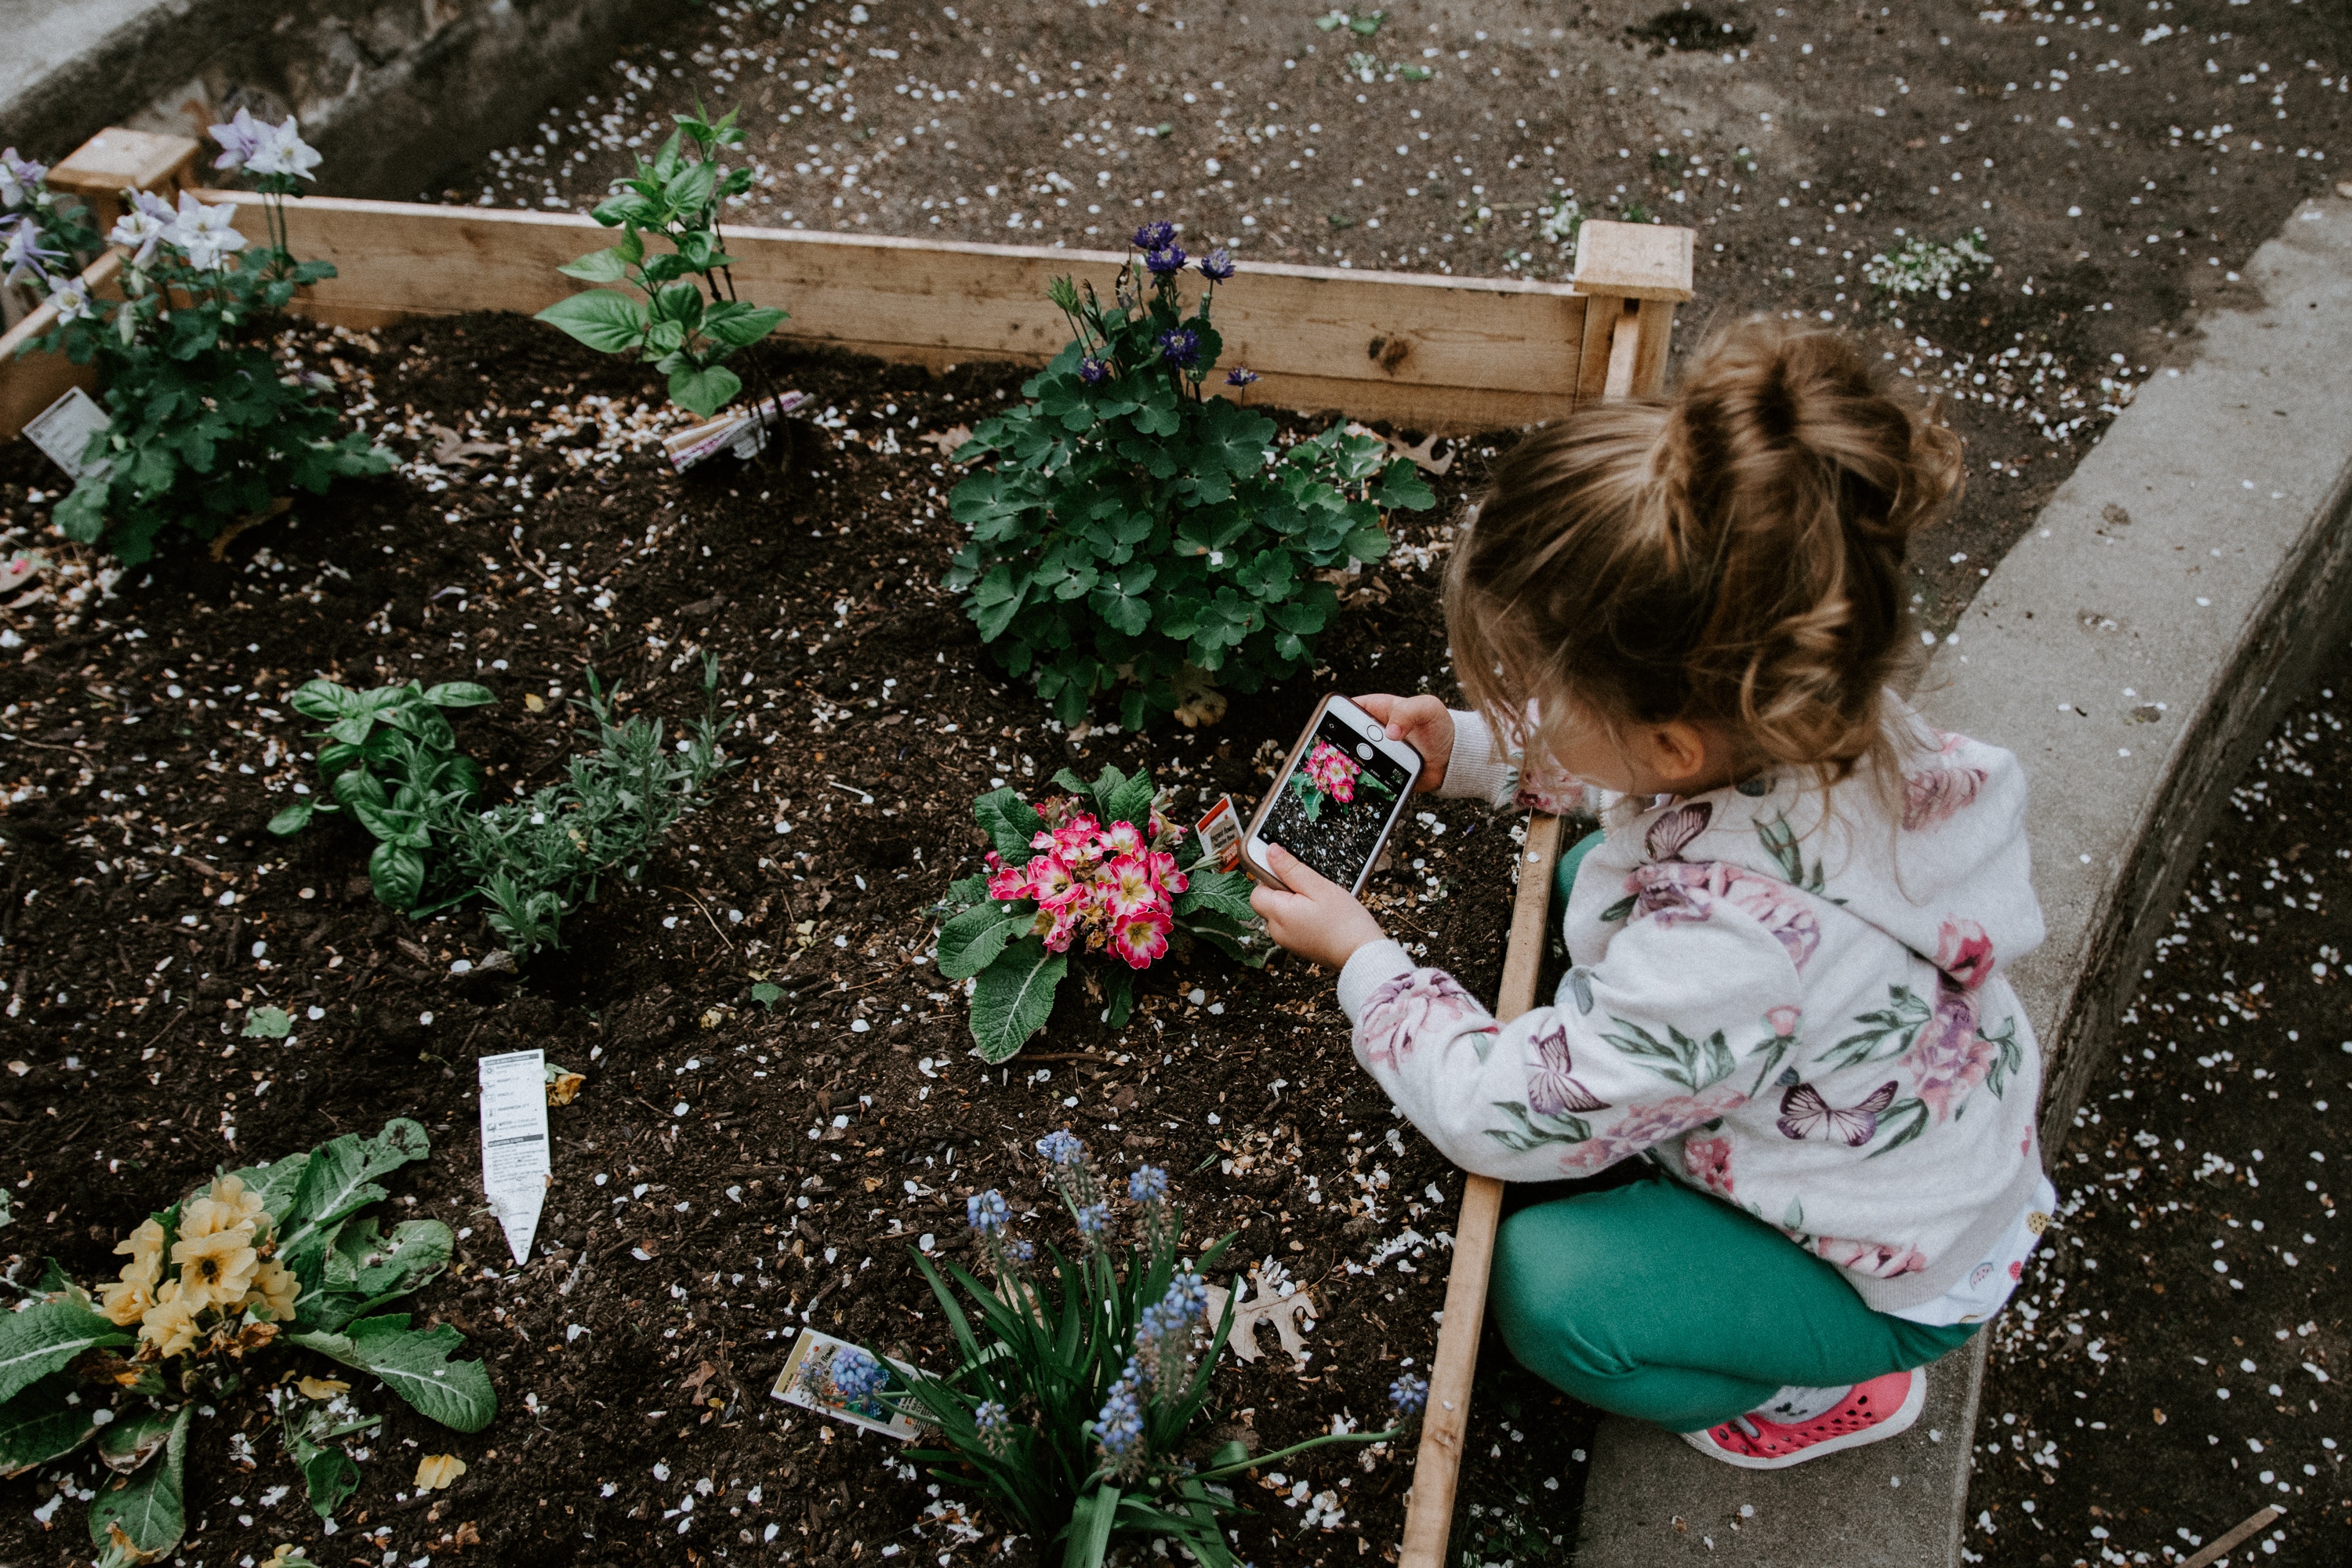 flowers, miscellanea, miscellaneous, flower bed, flowerbed, girl, photographer, child, hobby, interest